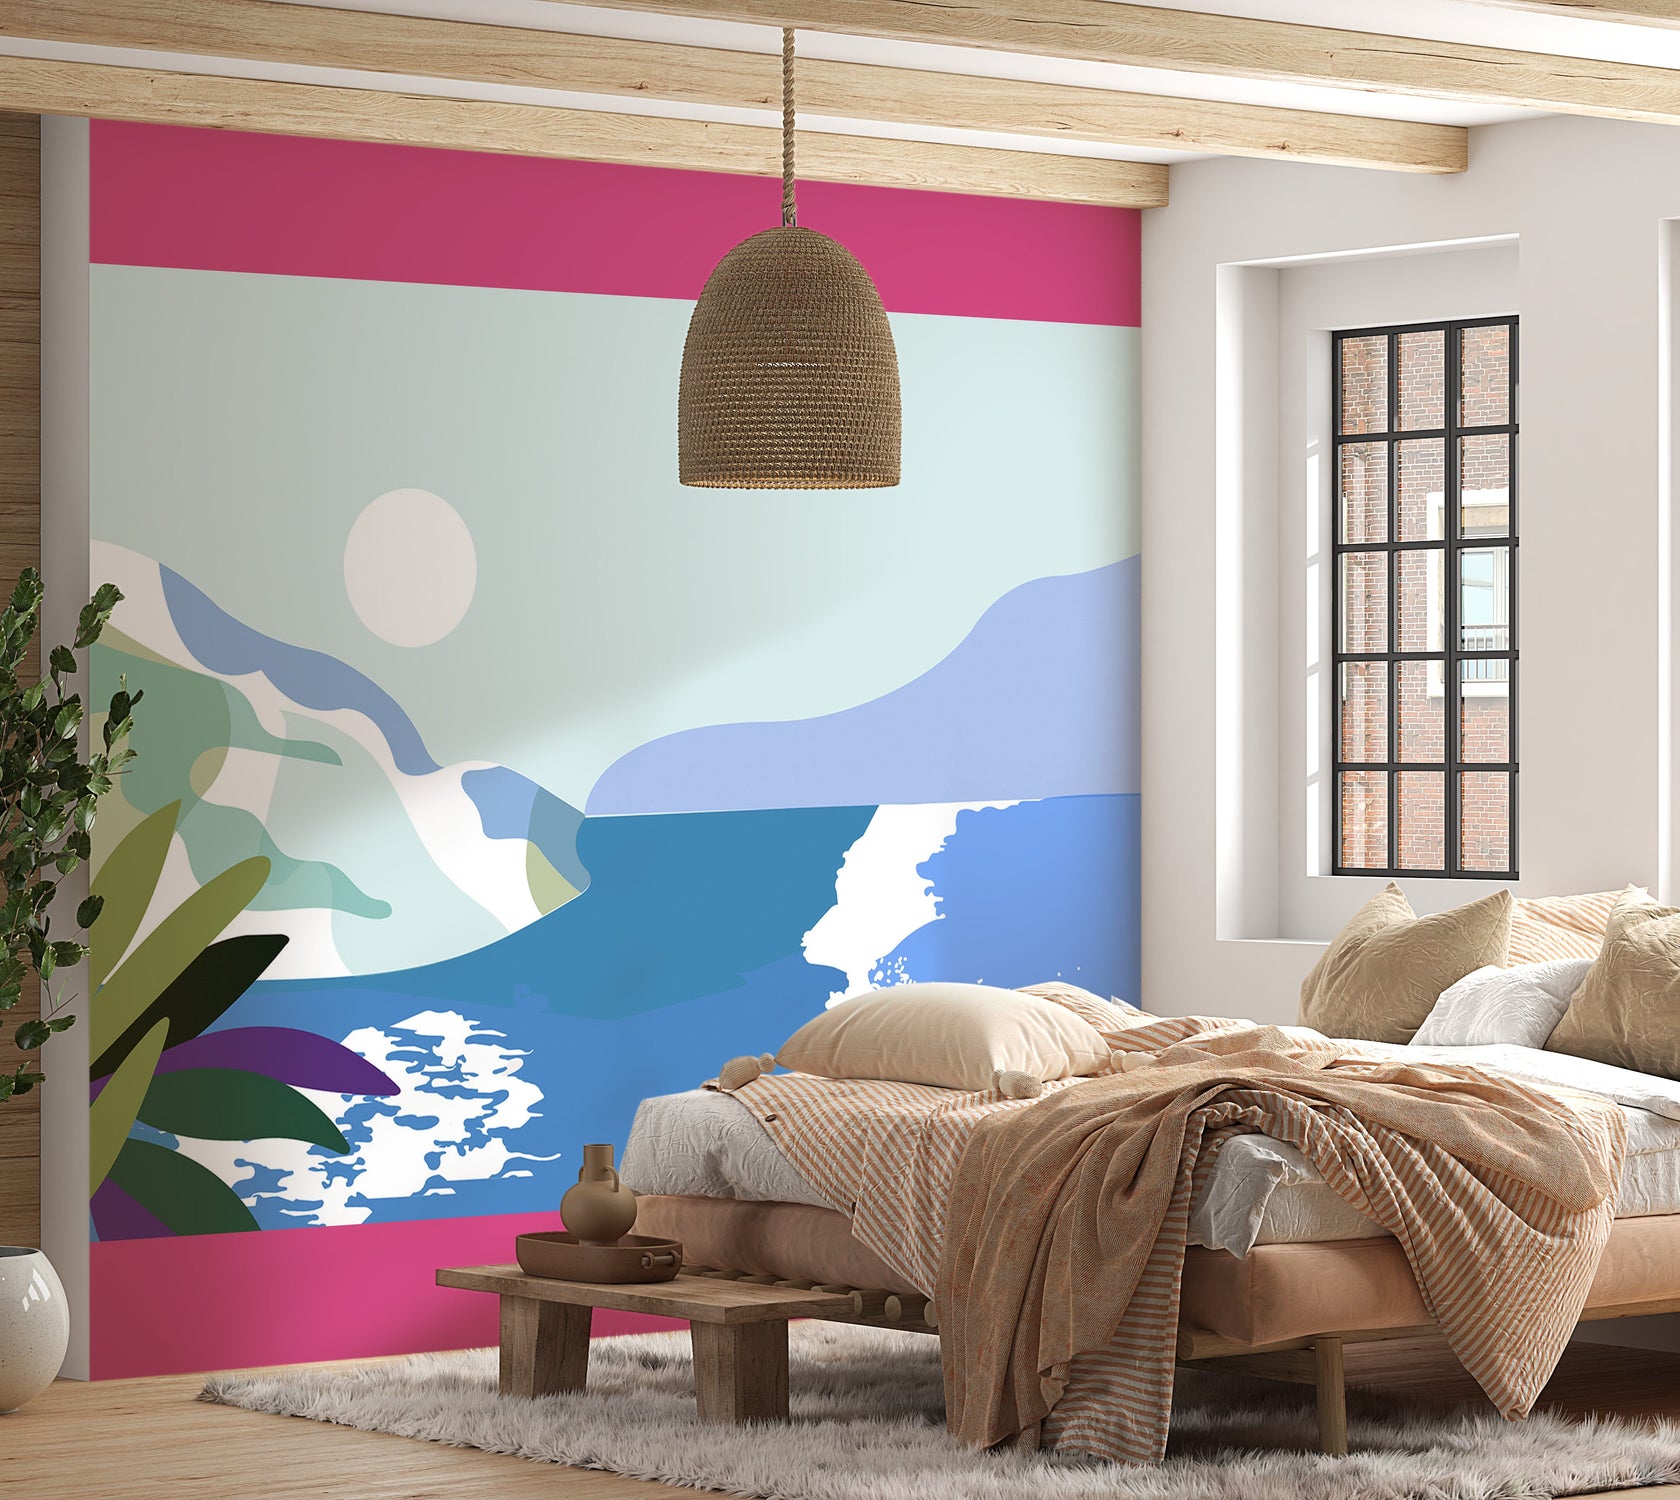 Peel & Stick Abstract Wall Mural - Modern Sea & Mountains - Removable Wall Decals-Tiptophomedecor